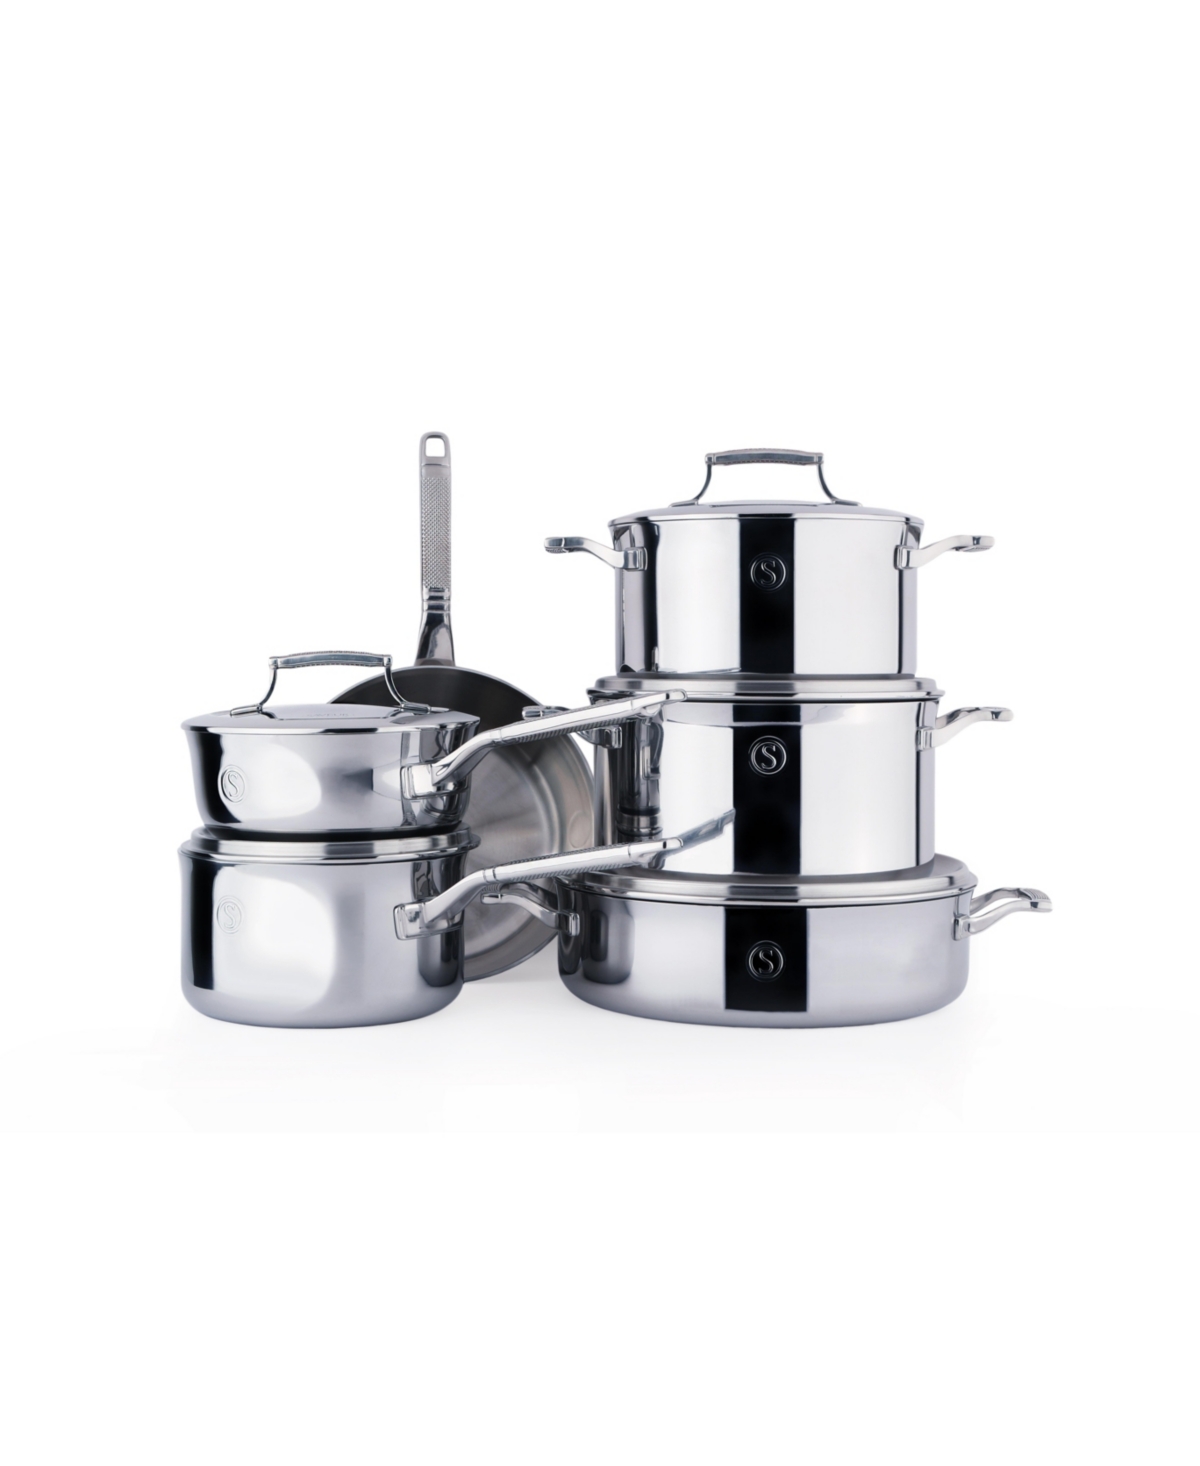 Saveur Selects Voyage Series Tri-ply Stainless Steel 11-pc. Cookware Set In Silver